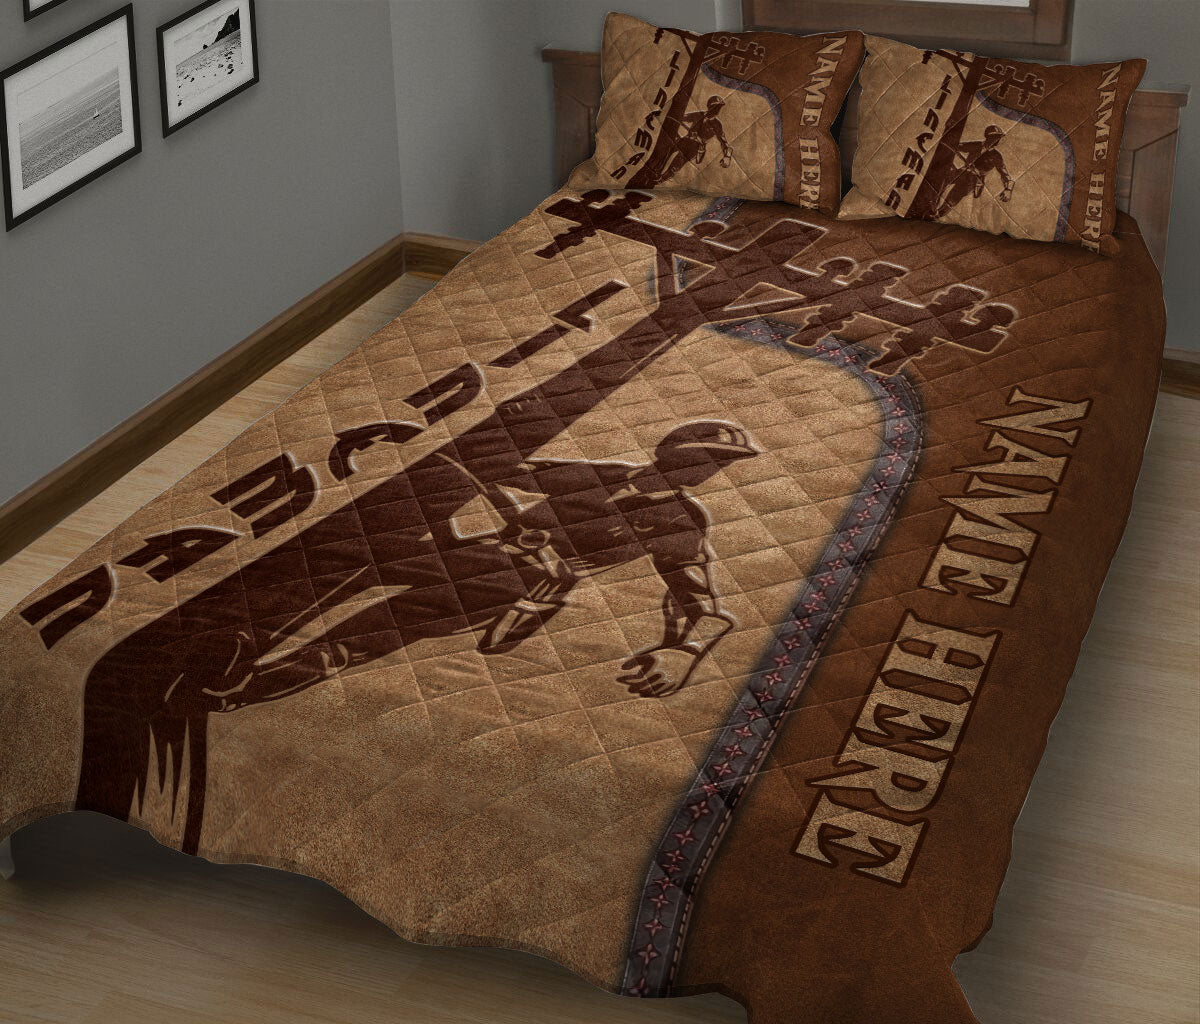 Ohaprints-Quilt-Bed-Set-Pillowcase-Electrician-Lineman-Brown-Pattern-Unique-Gift-Blanket-Bedspread-Bedding-3009-King (90'' x 100'')